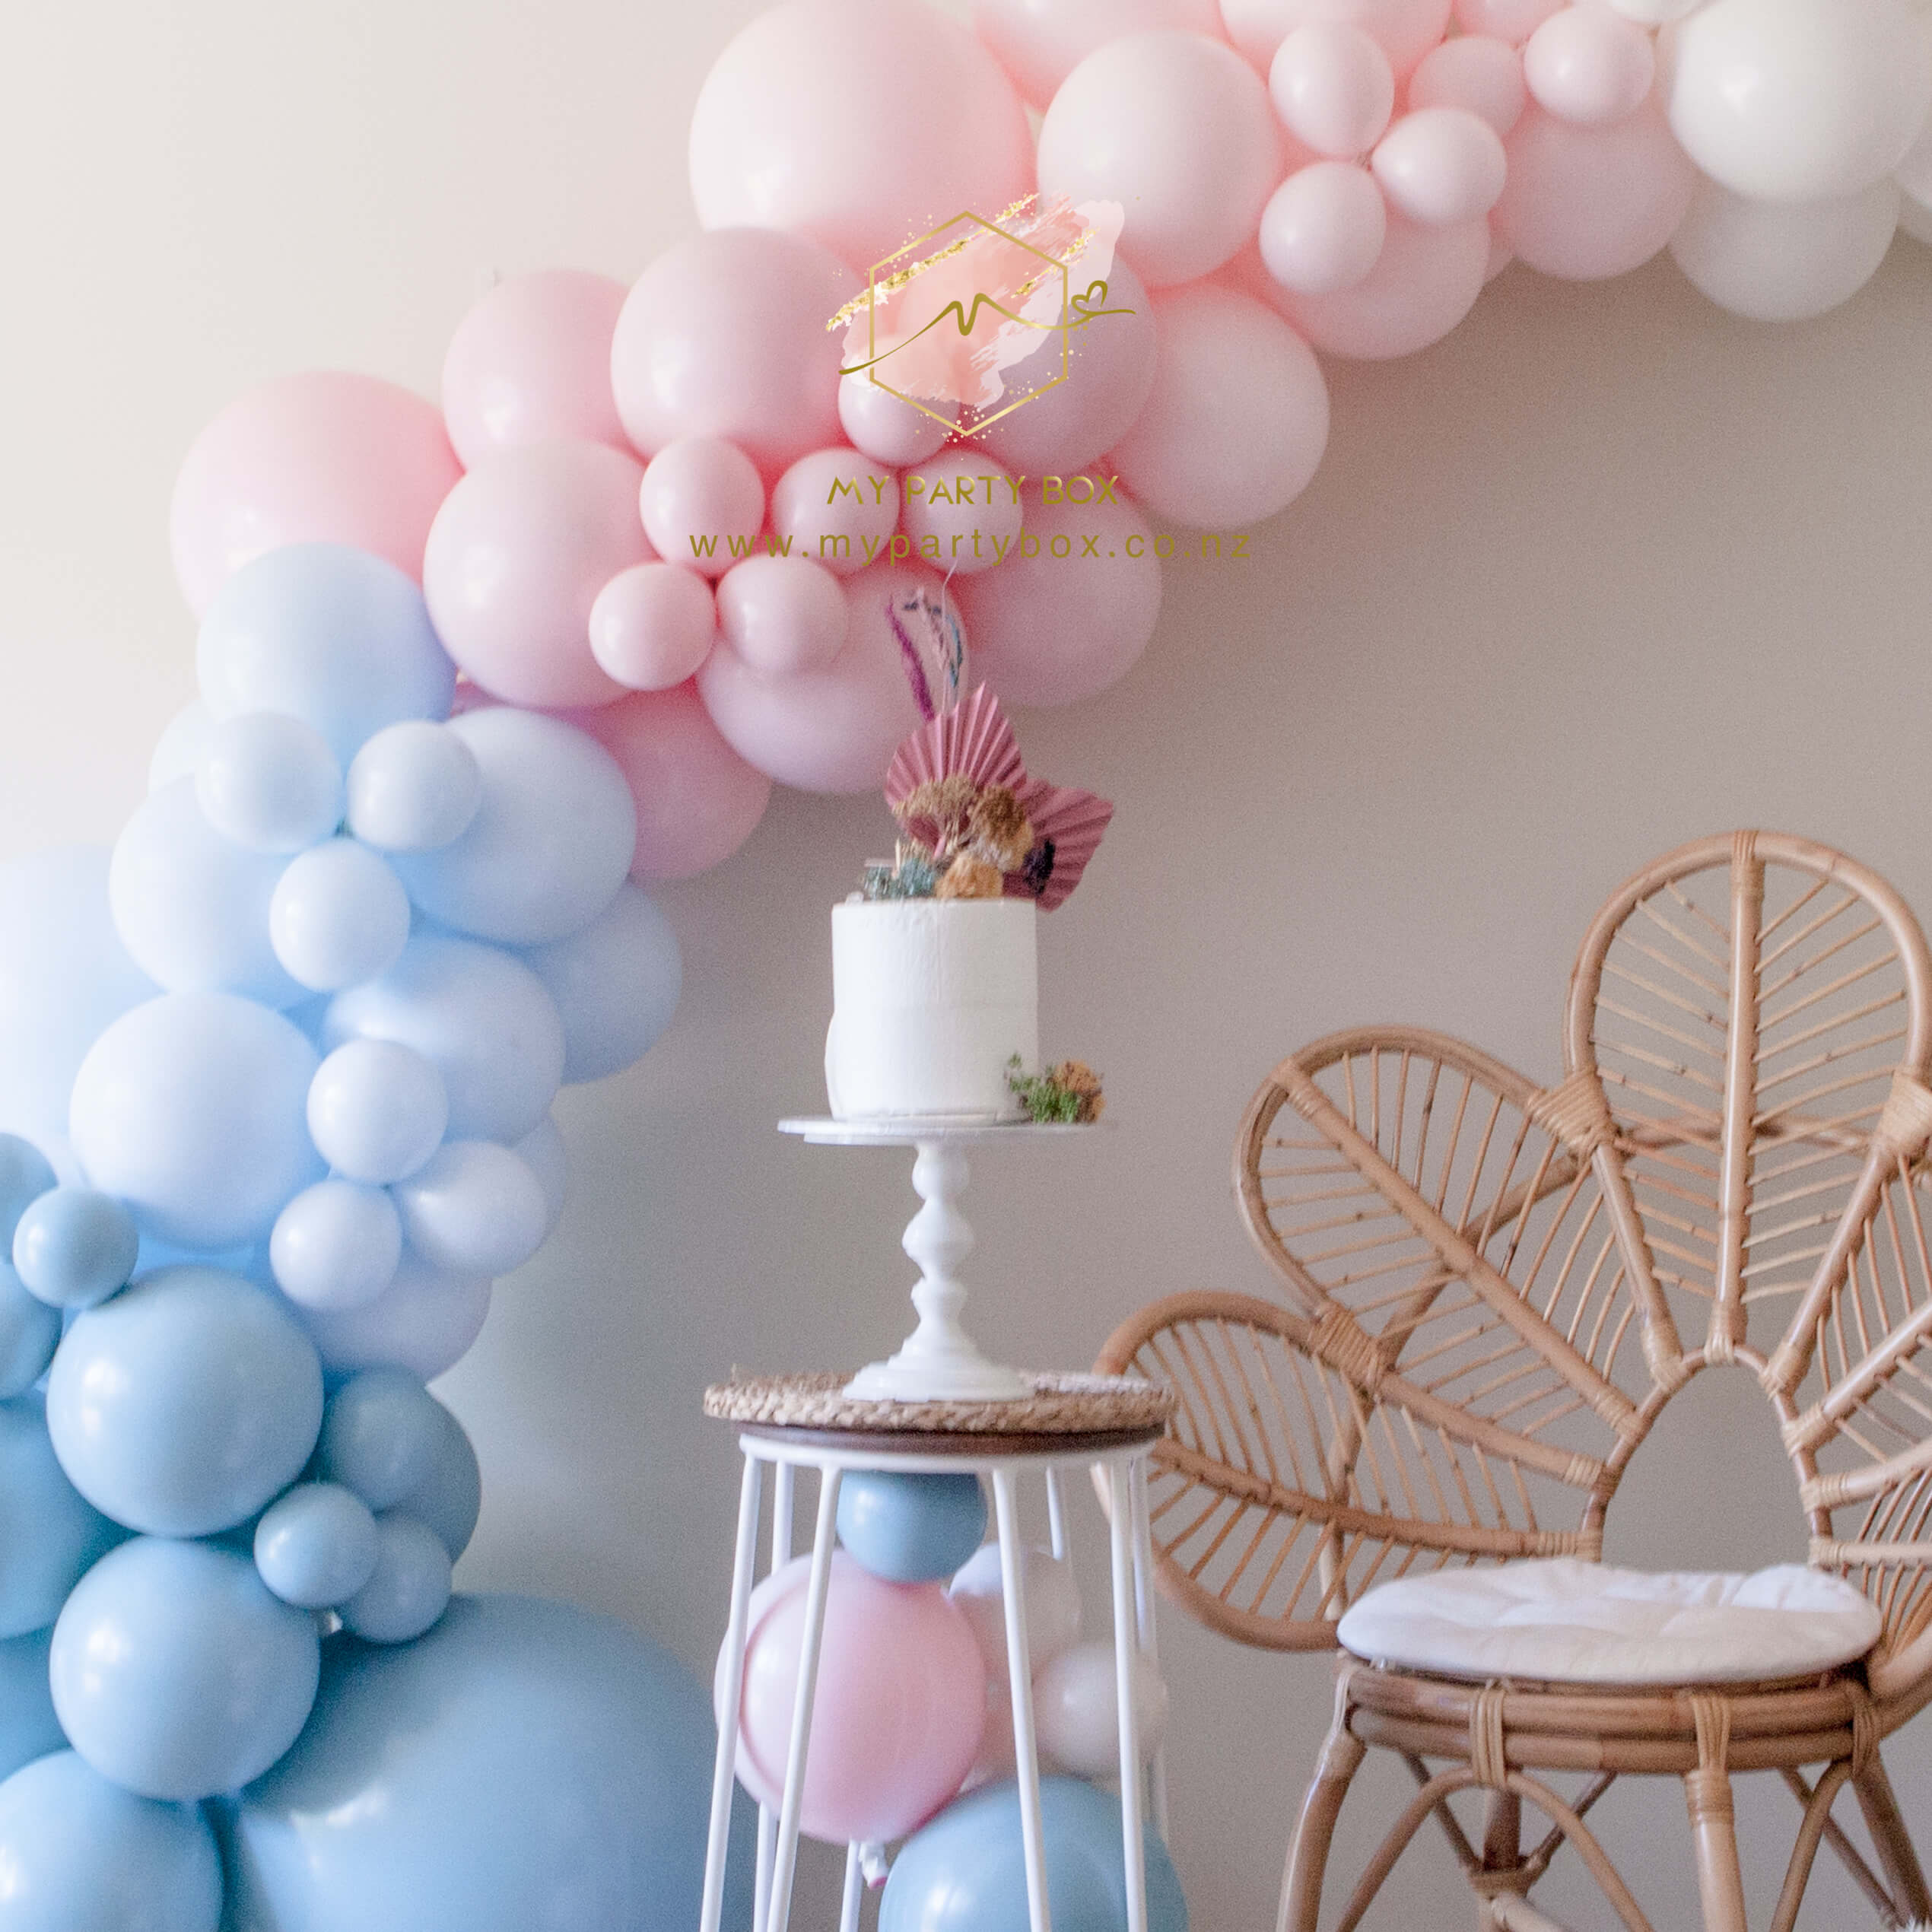 My Party Box Luxe Oh My Dear Baby Balloon Garland DIY Kit with Sold seaglass, Blue chalk, Raspberry chalk, Rose chalk and solid white latex balloons